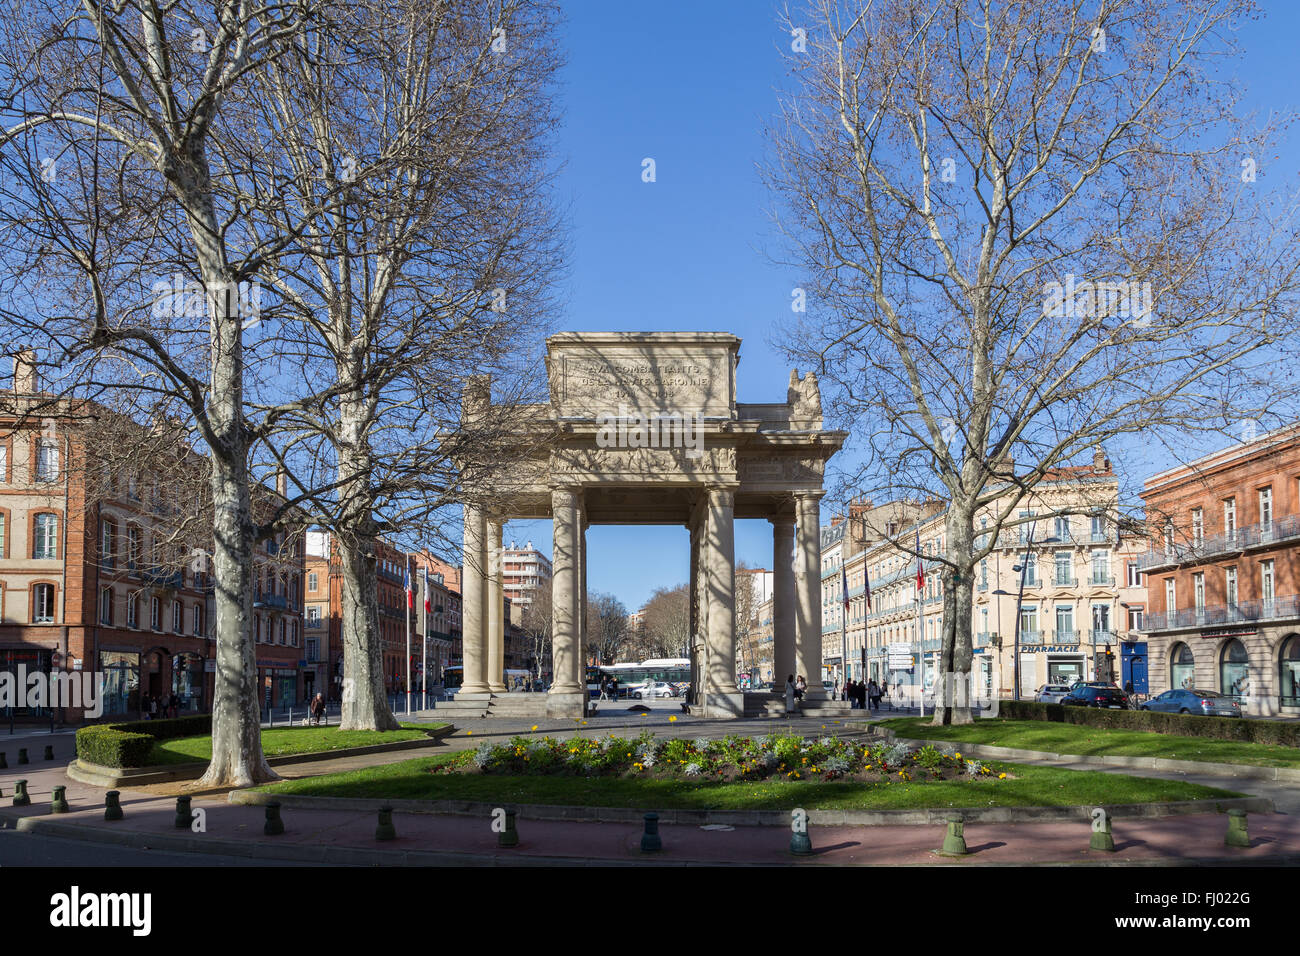 Toulouse, France - February 21, 2016: Photograph of the Monument aux Morts. Stock Photo